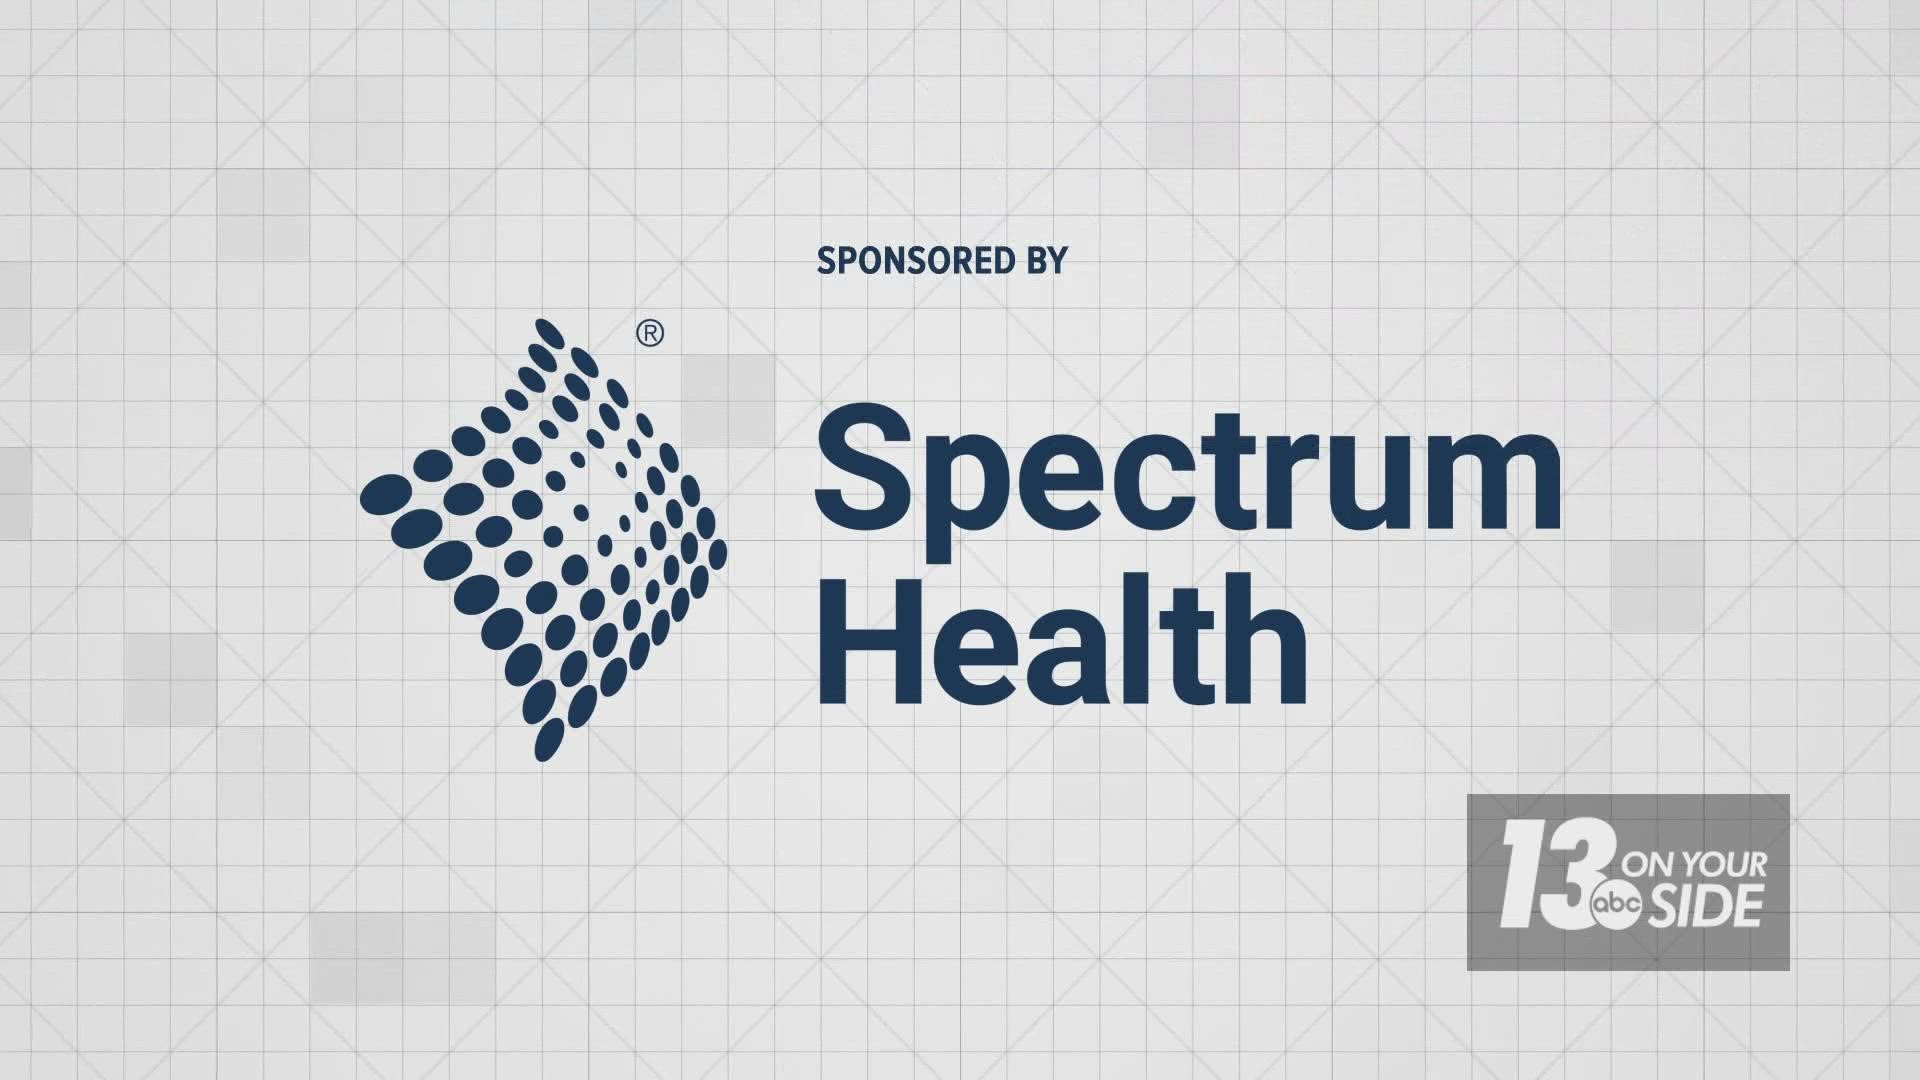 You don’t have to be a long-distance runner or semi-pro athlete to work with the health care professionals at Spectrum Health.